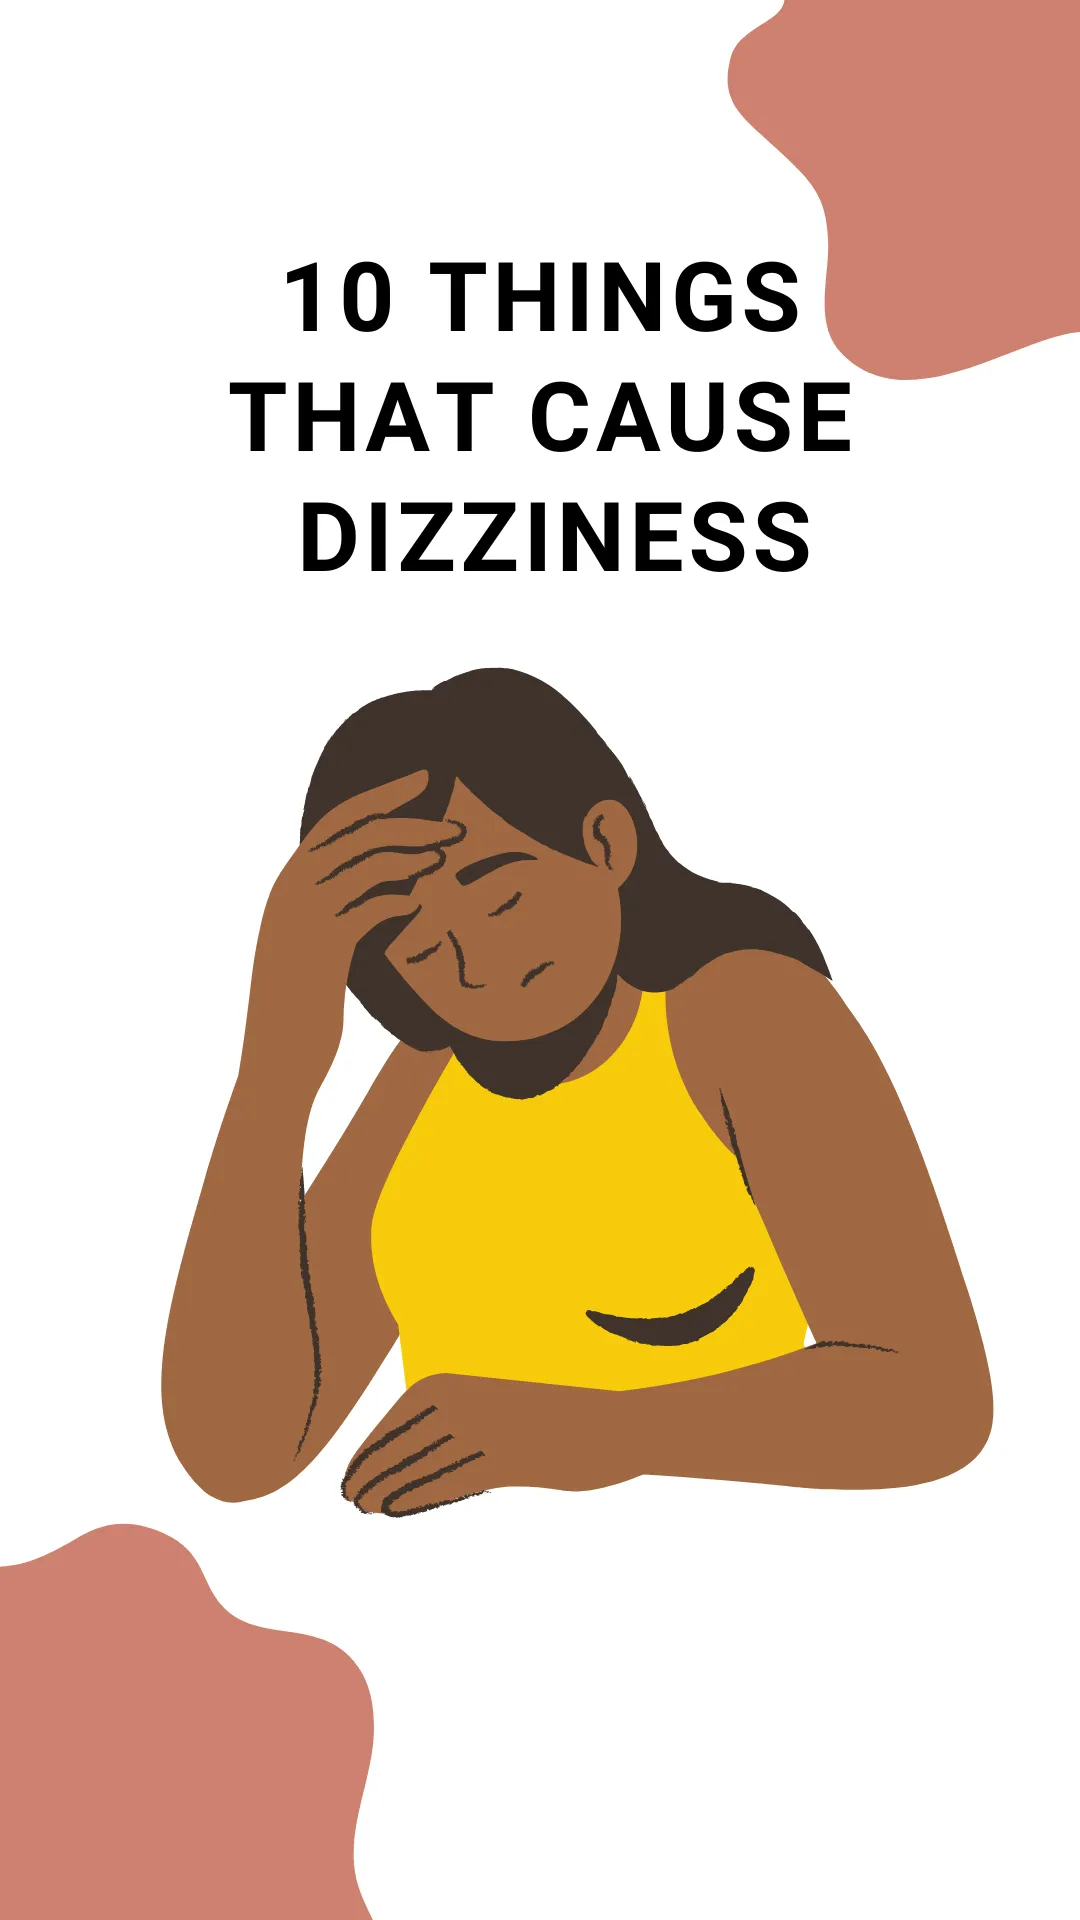 10 things can cause dizziness